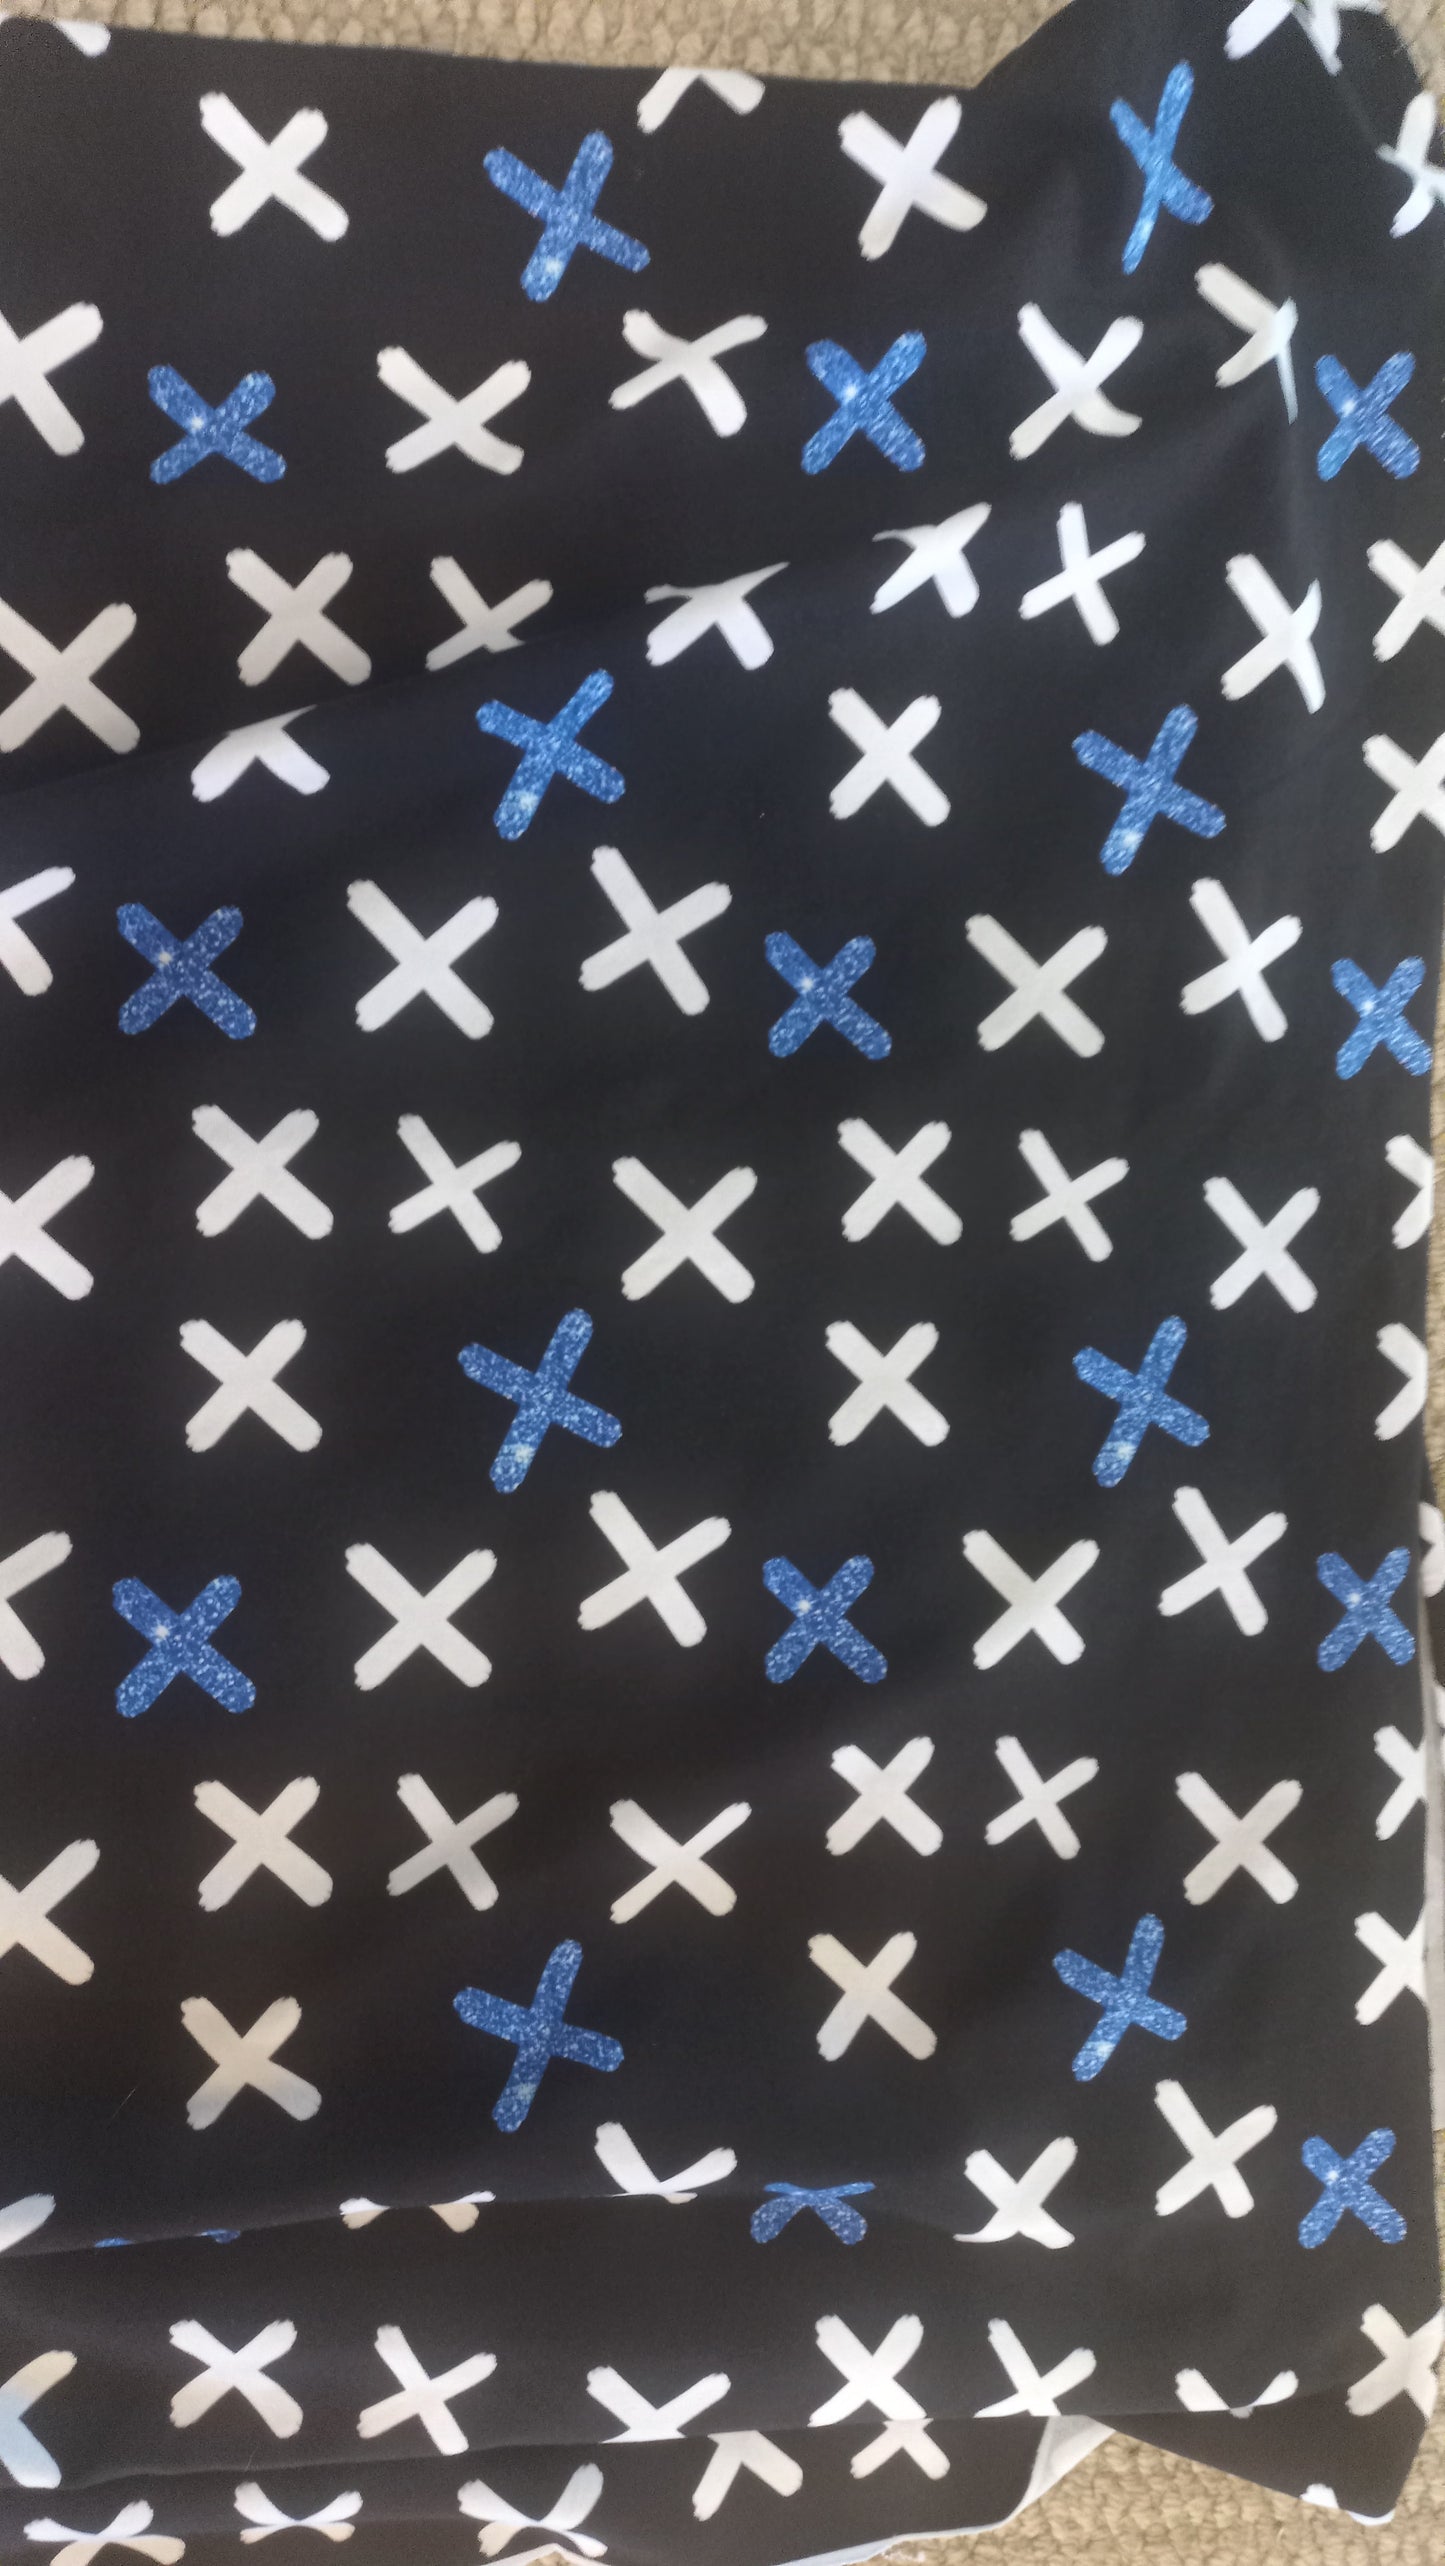 White and Blue crosses -cotton spandex -210g-150width